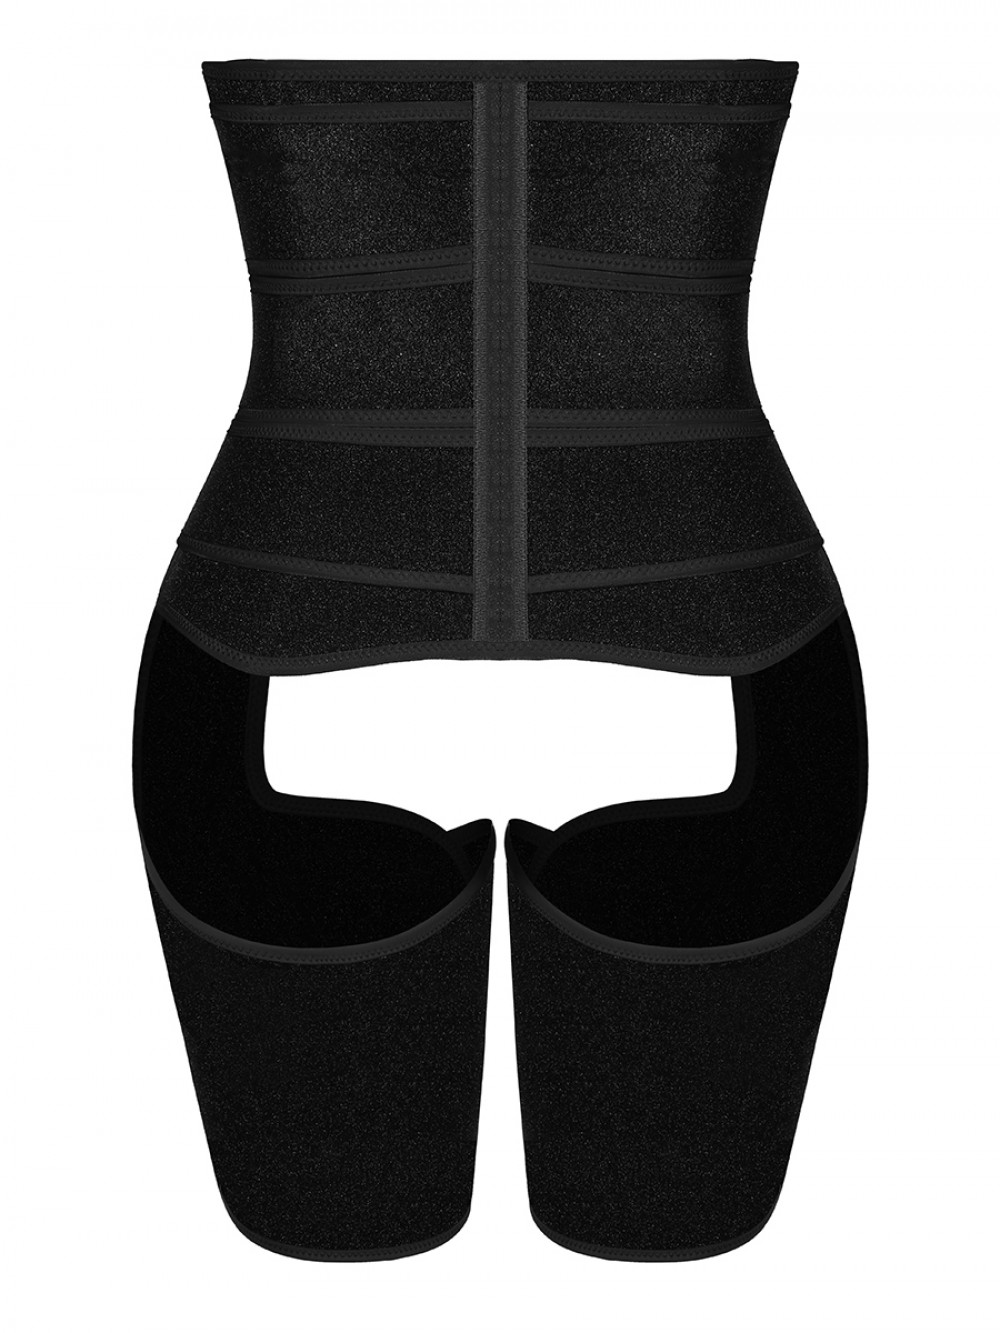 Black Tummy And Thigh Shaper Neoprene 3 Belts Midsection Compression